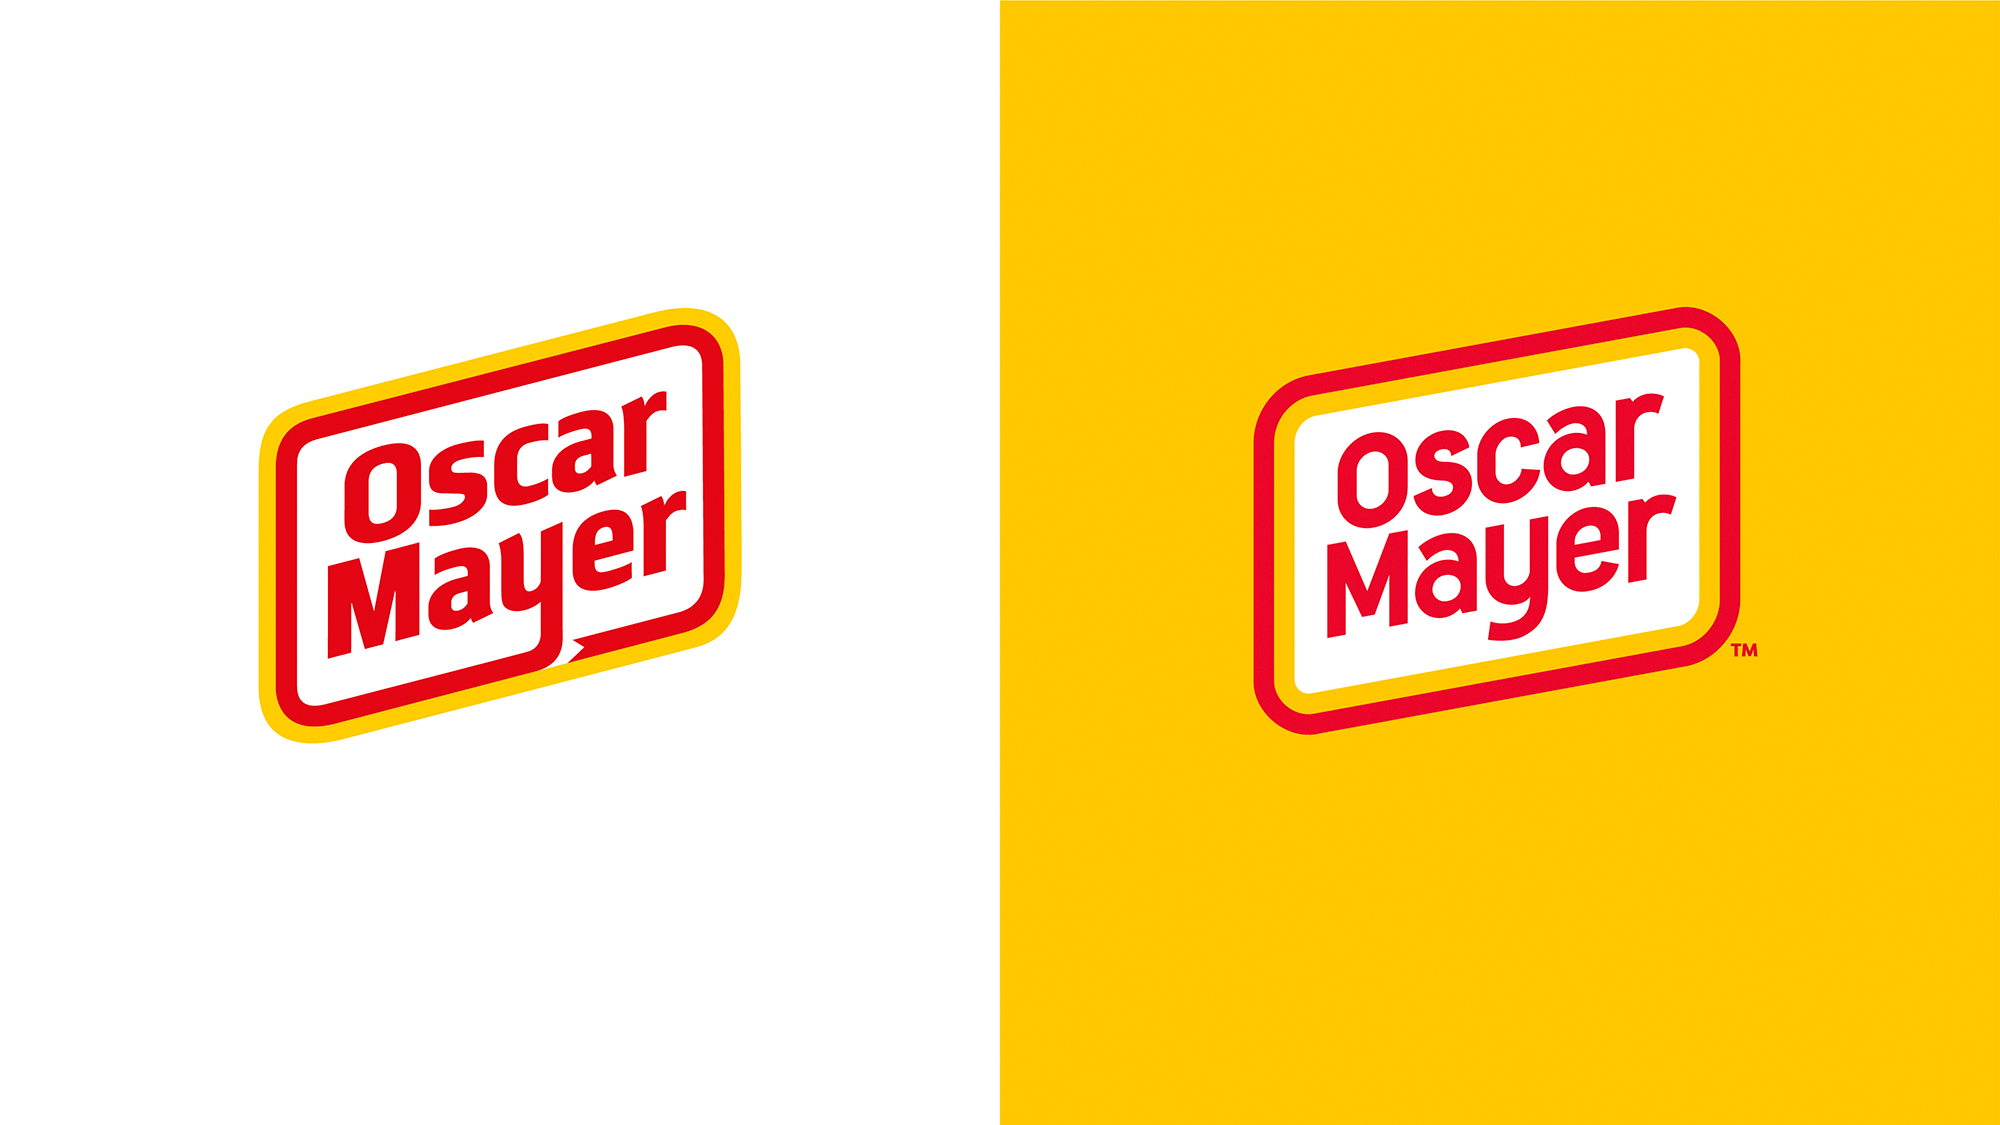 New Logo, Identity, and Packaging for Oscar Mayer by BrandOpus